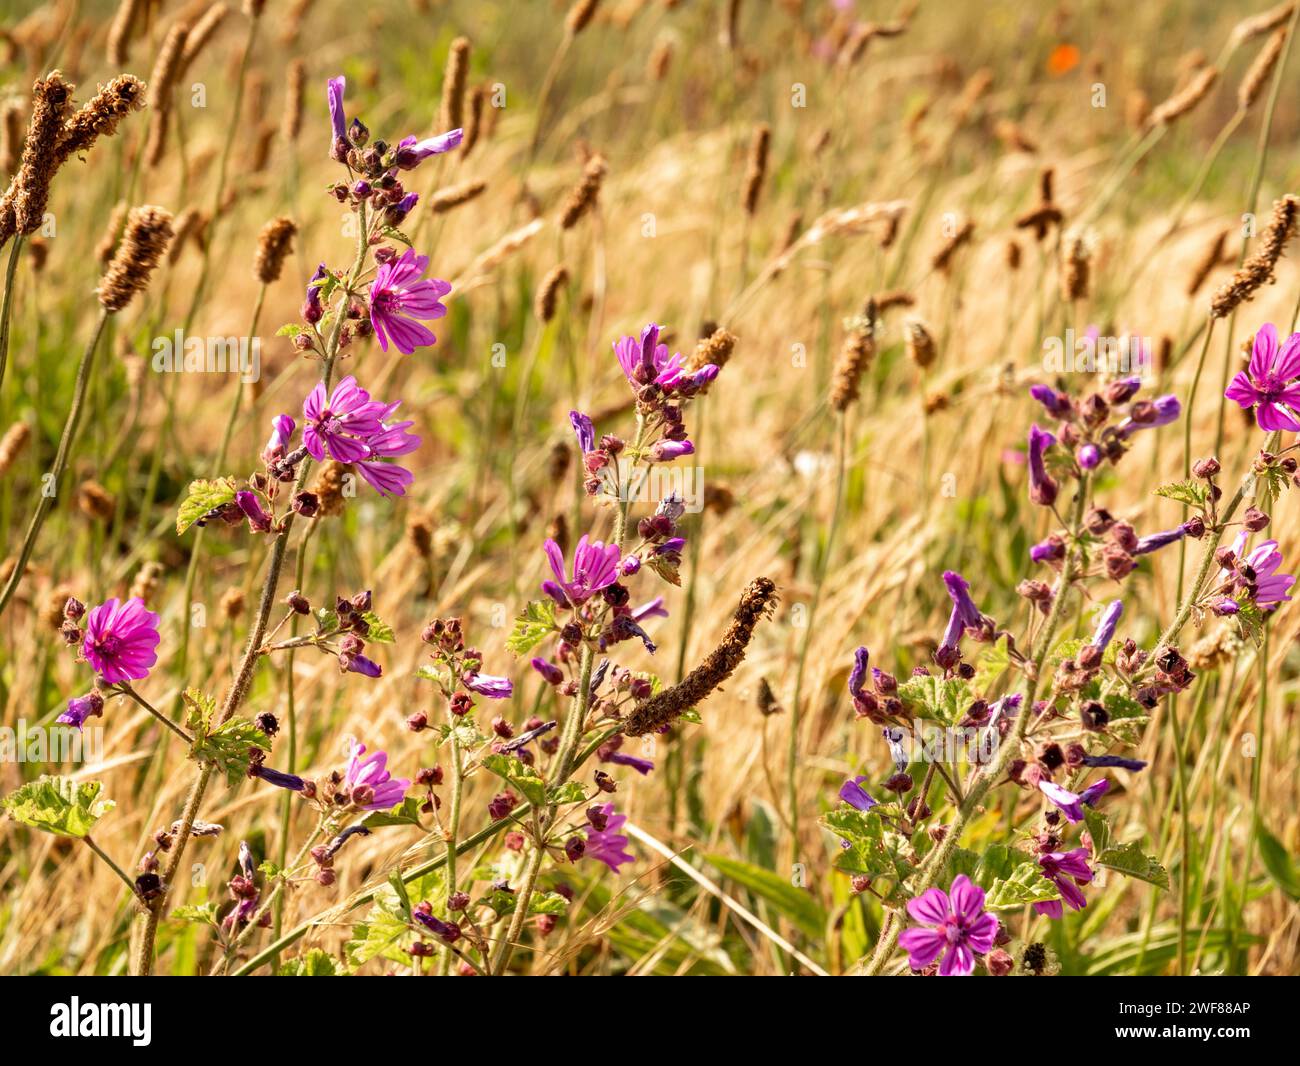 Common mallow, Malva sylvestris, blooming with mauve purple flowers growing in field of grass, Netherlands Stock Photo